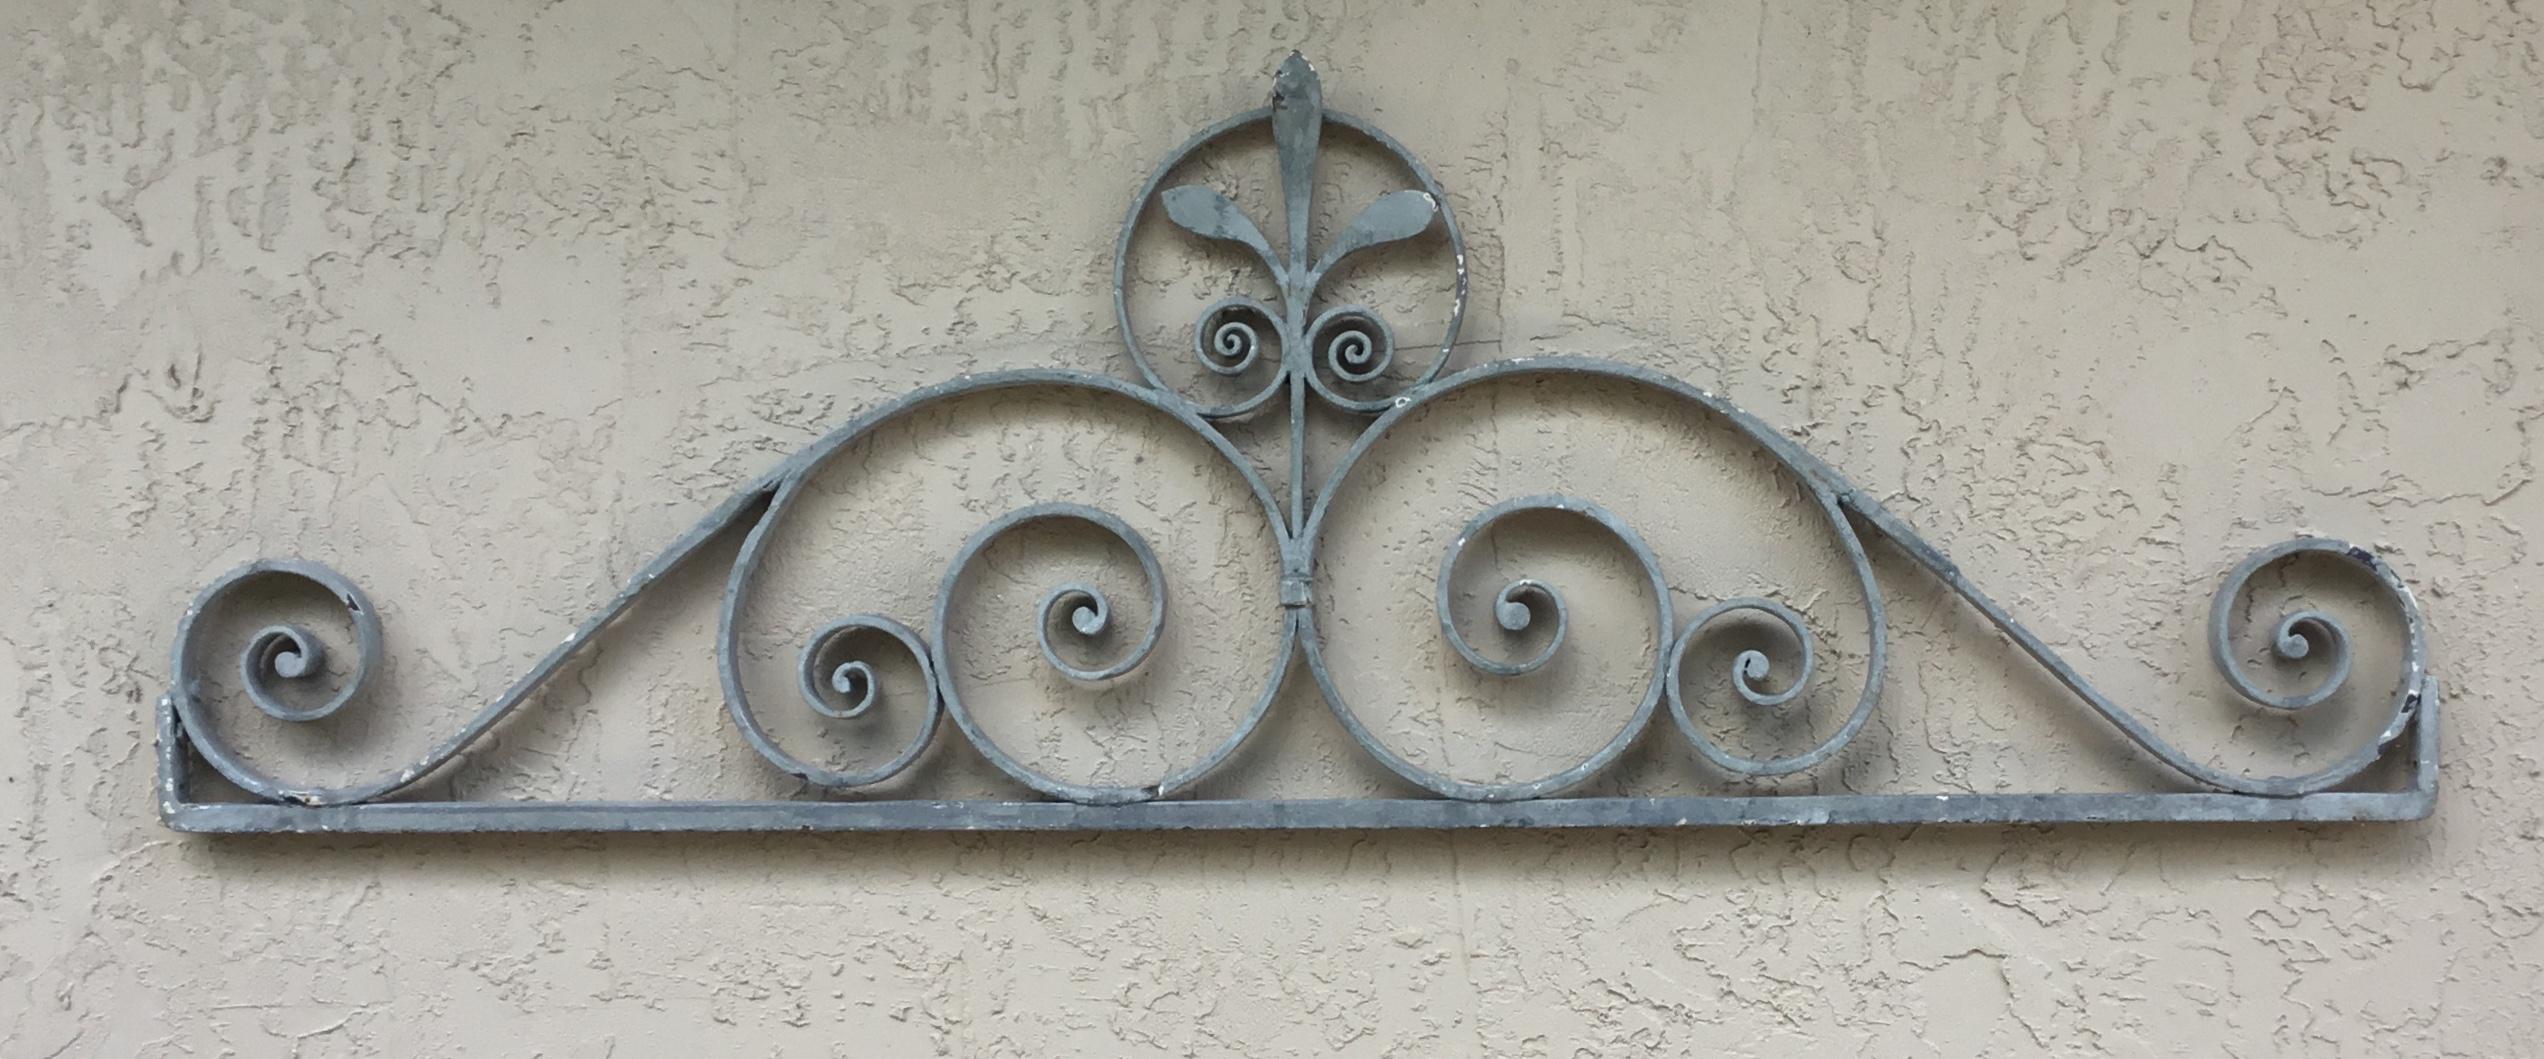 Architectural wall hanging made of solid wrought iron, painted in grey color. Will look great overhead entrance, door or just as architectural wall hanging.